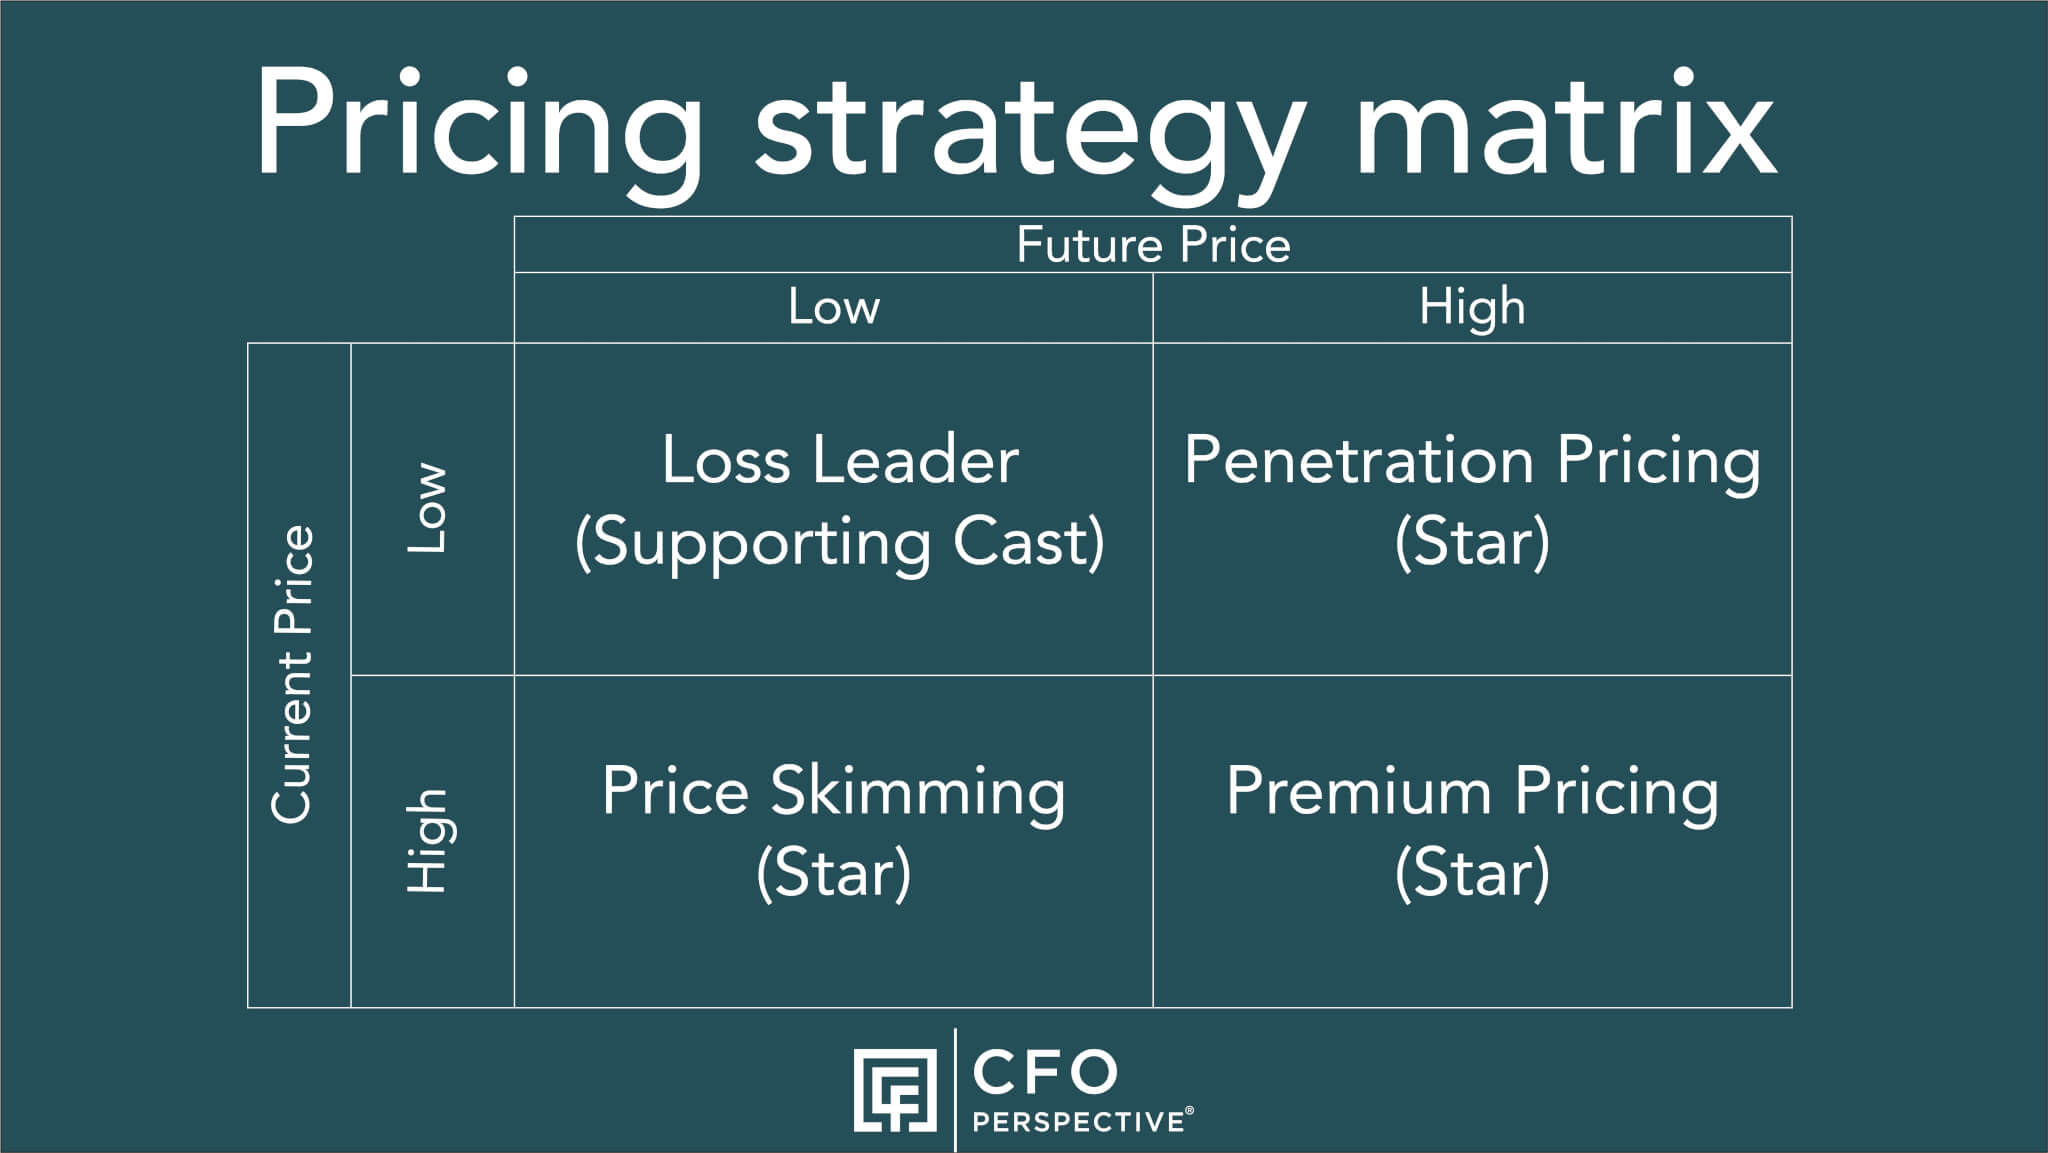 New product price strategy matrix:
Loss leader: Low current price and high future price, Penetration pricing: Low current price and high future price, Price skimming: High current price and low future price, Premium: High current and future price